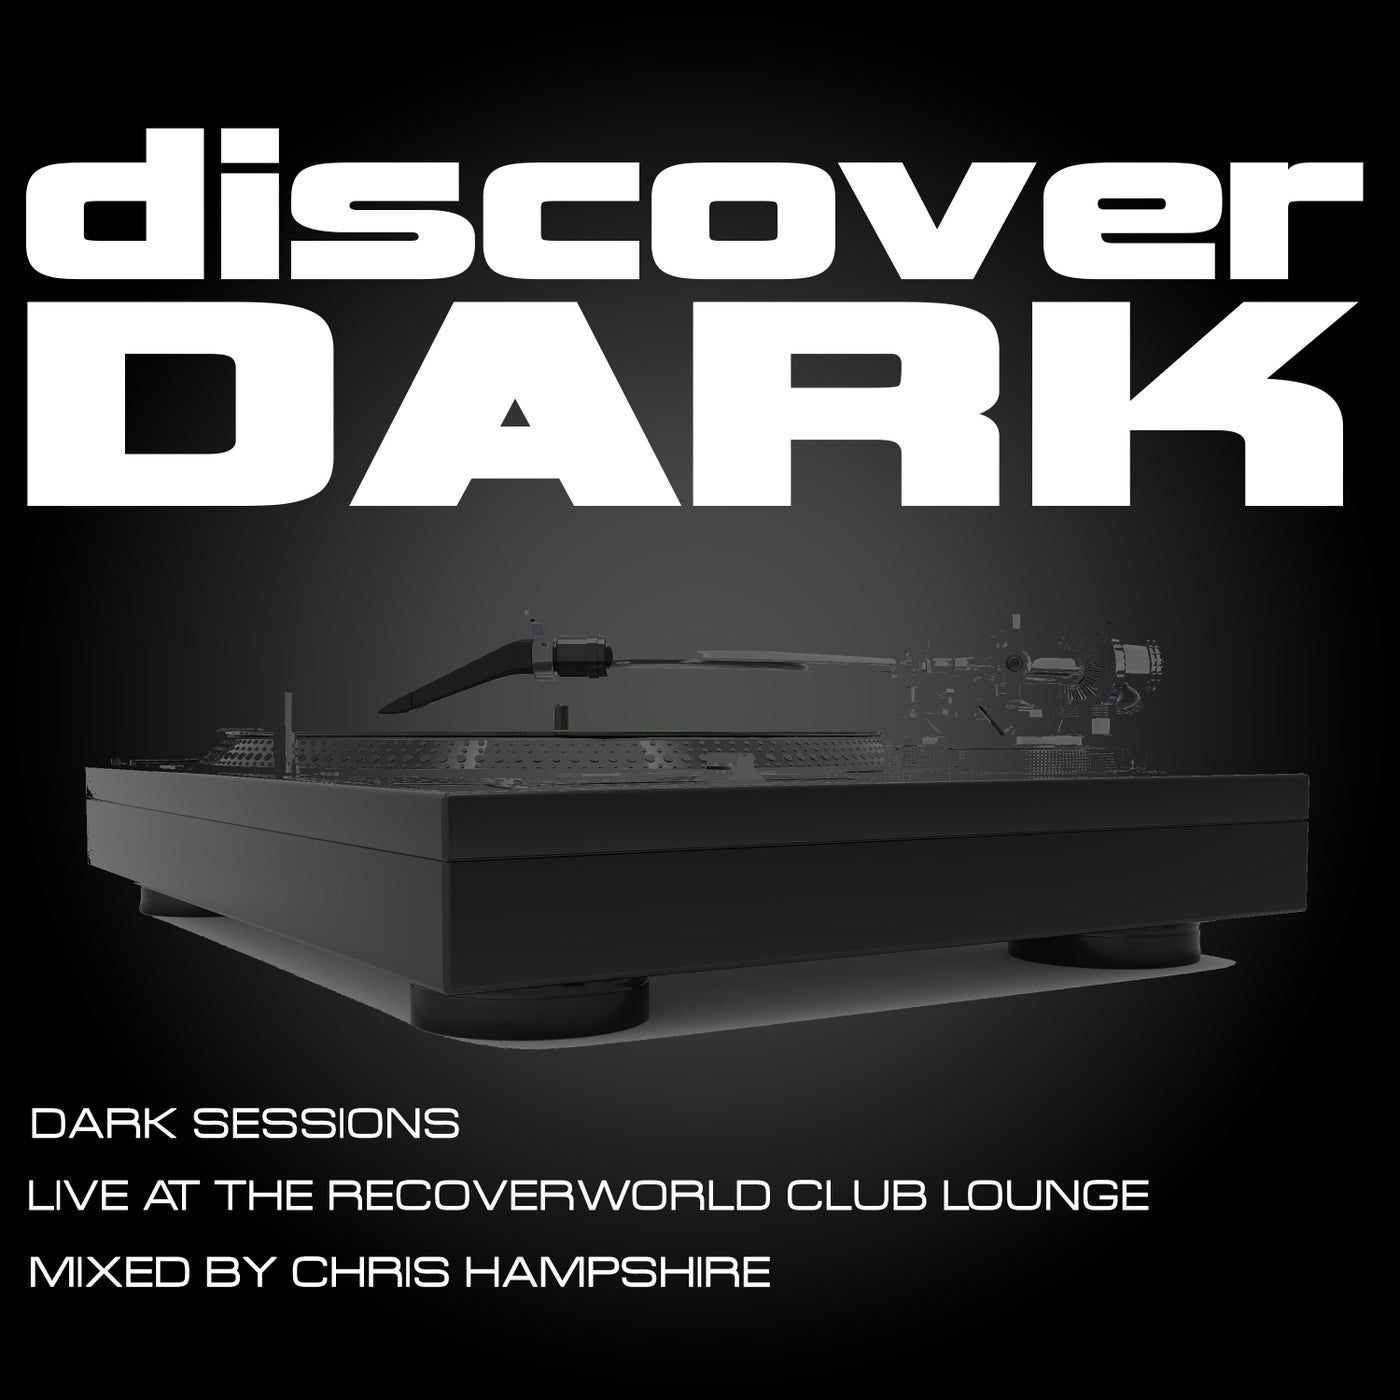 Dark Sessions Live at the Recoverworld Club Lounge